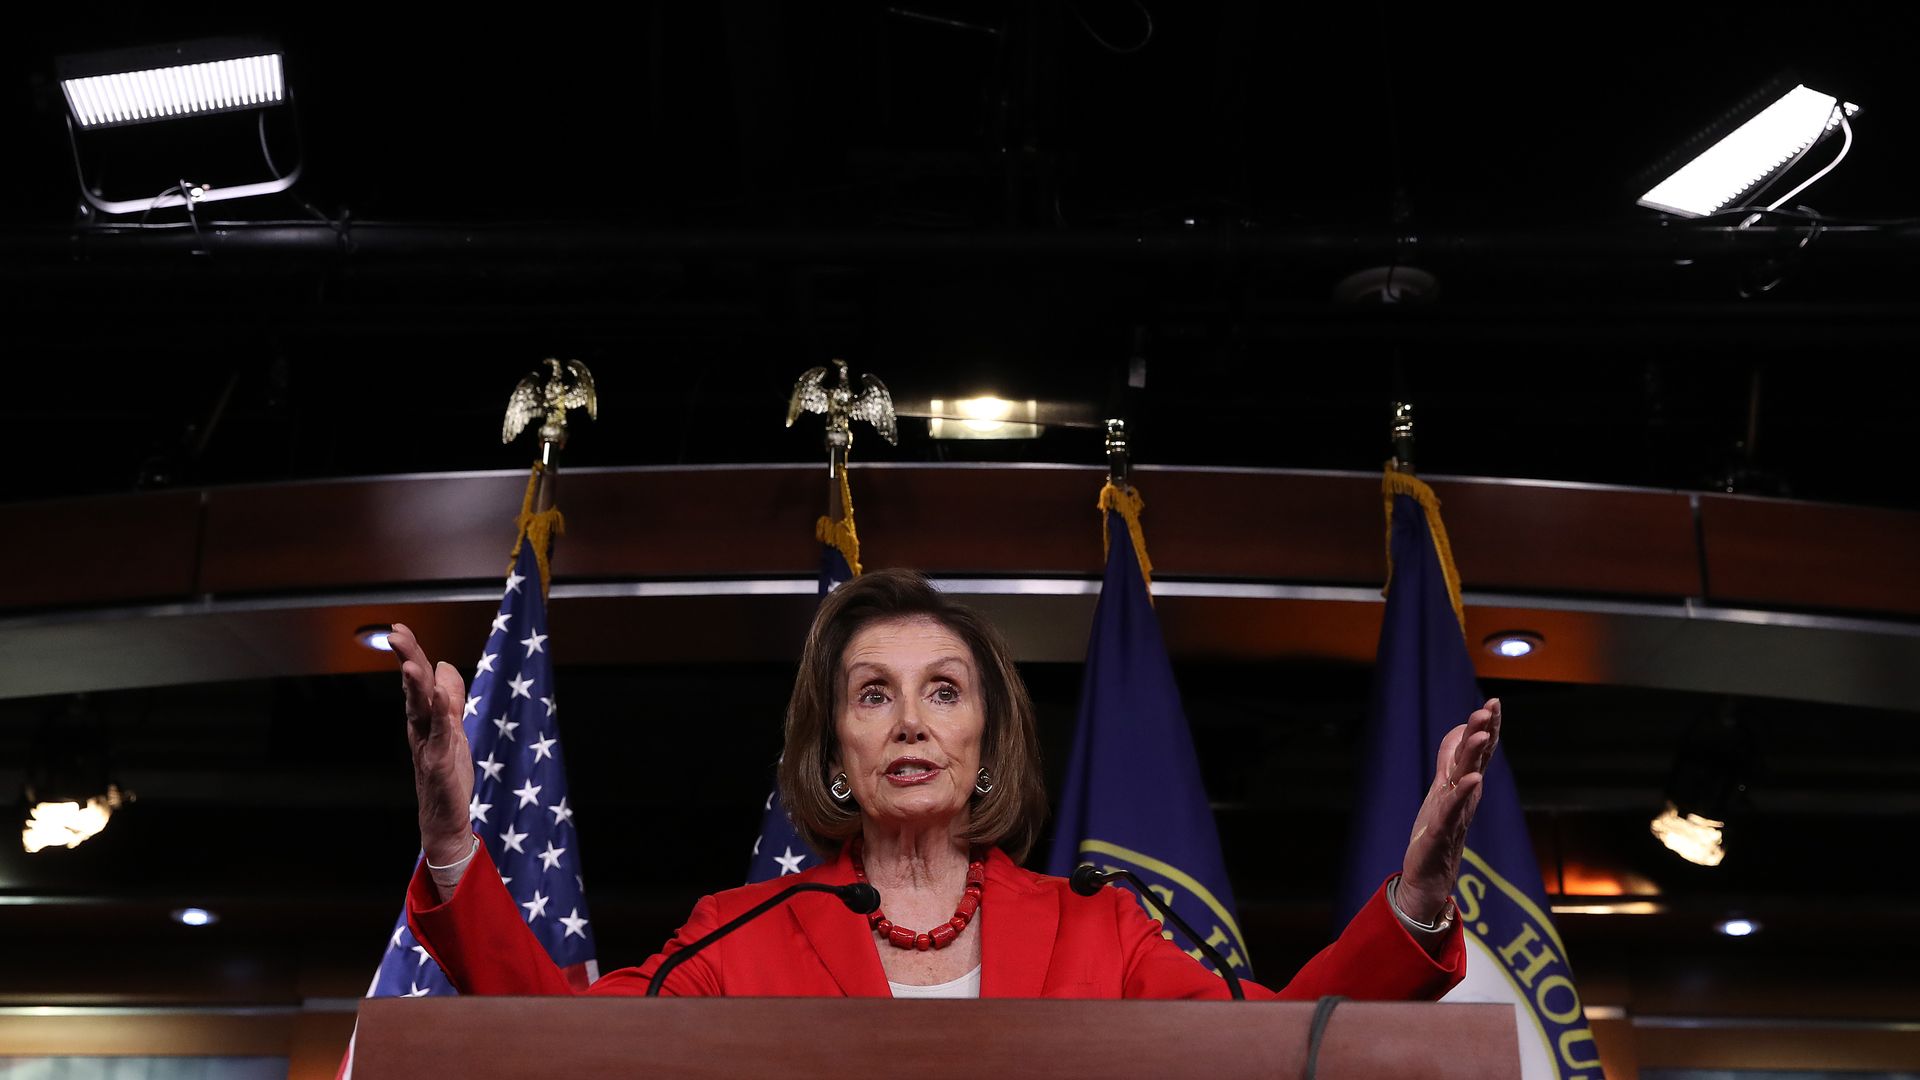 In this image, Nancy Pelosi stands behind a podium and speaks.